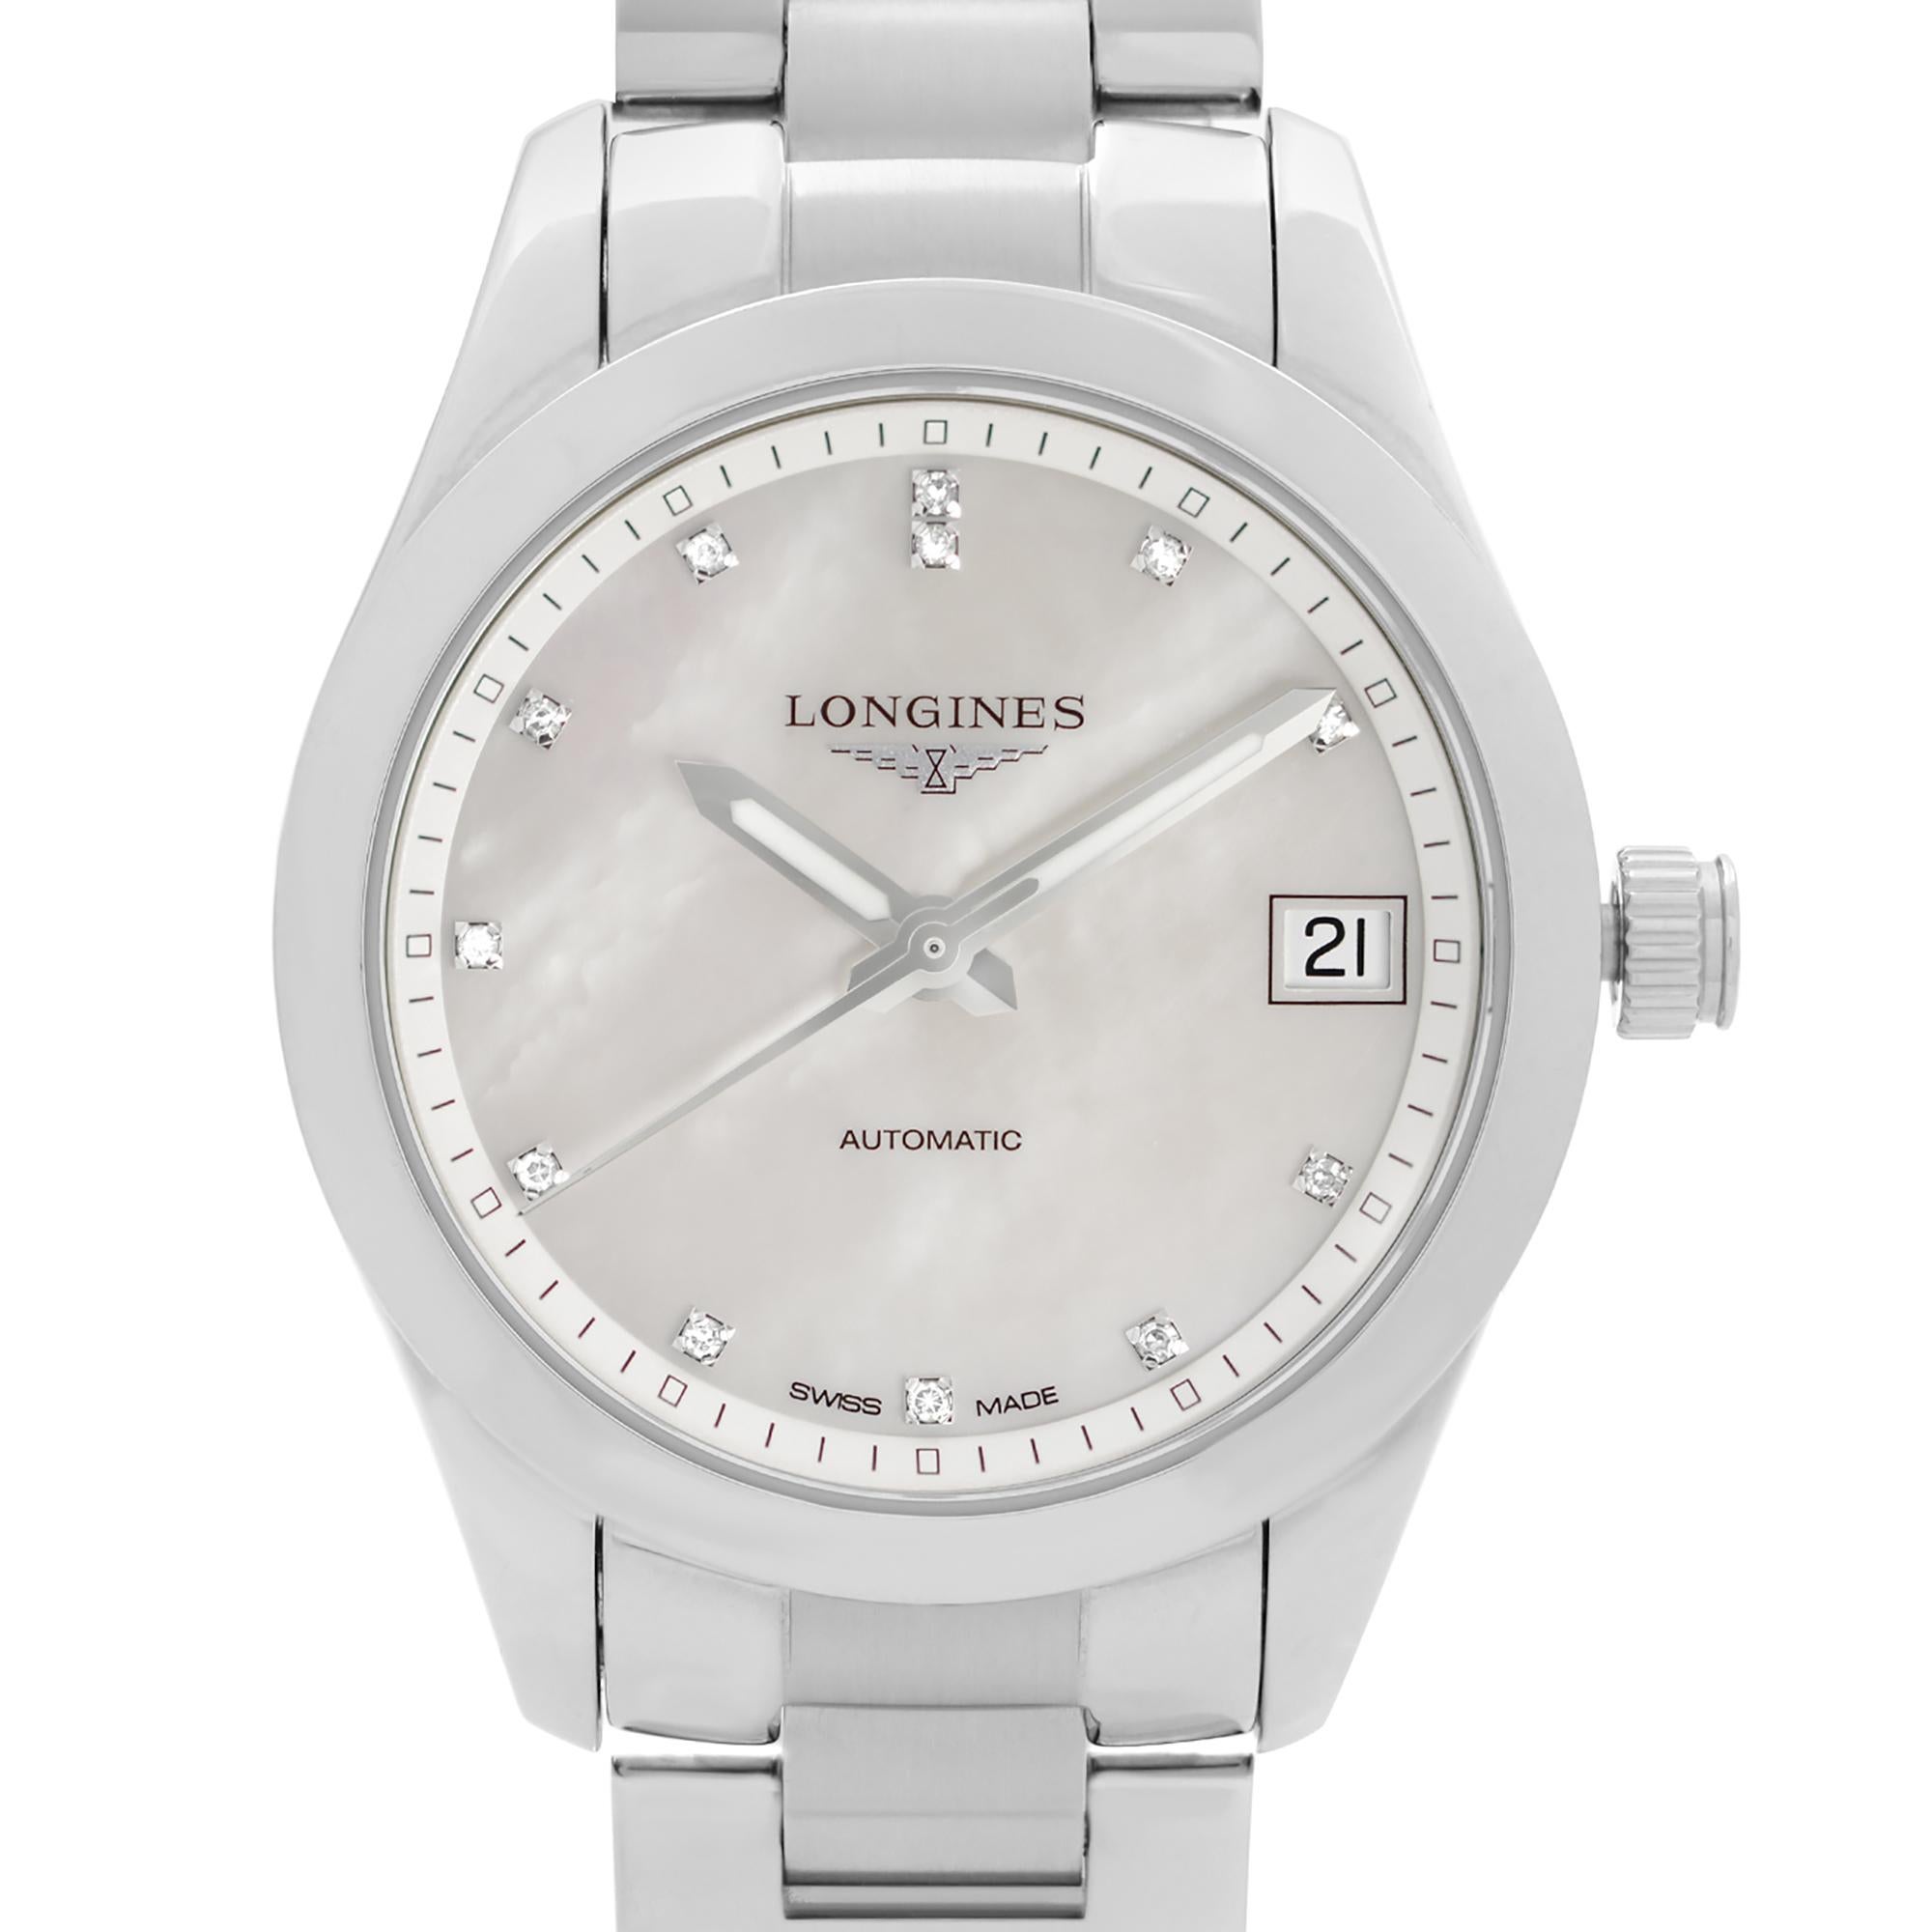 Never Worn Longines Conquest Classic Steel MOP Dial Automatic Ladies Watch L2.385.4.87.6. This Beautiful Timepiece Features: Stainless Steel Case and Bracelet. Mother of Pearl Dial with Luminous Hands, and 12 Diamonds Hour Markers (0.048 ct.). The